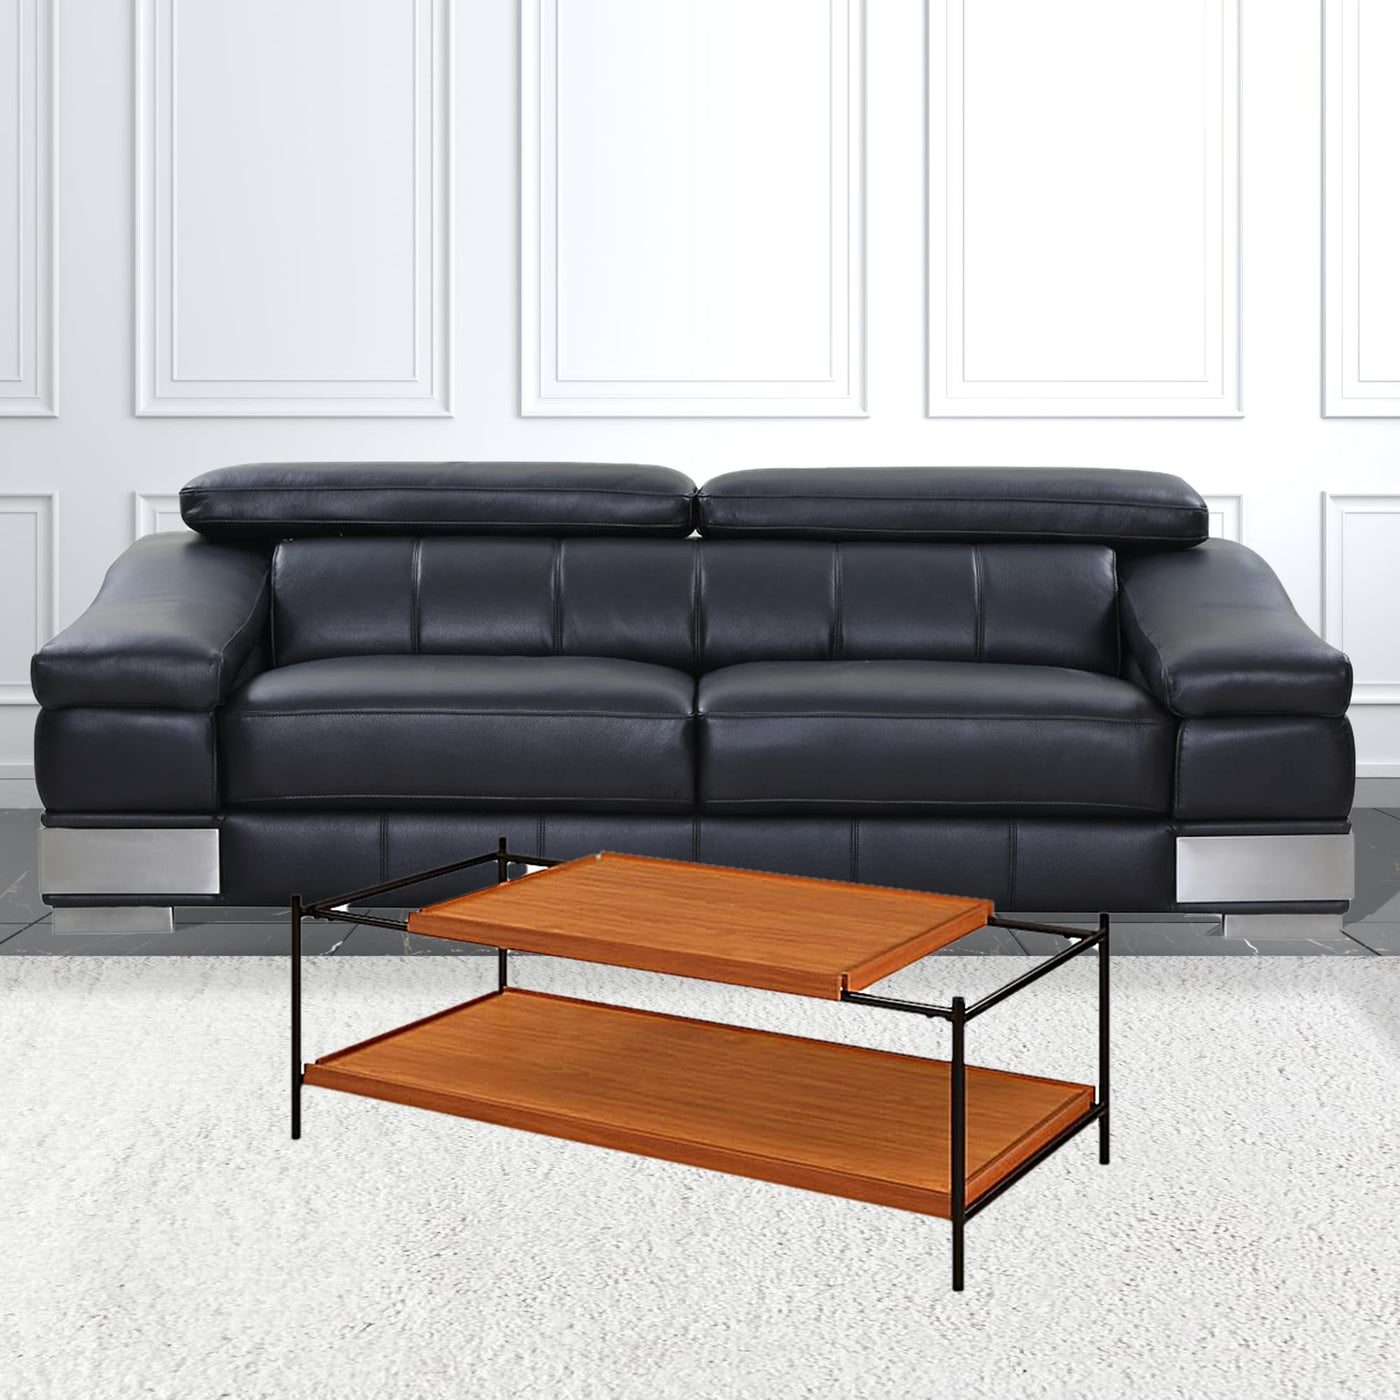 48’ Black And Honey Oak Rectangular Coffee Table With Shelf - Coffee Tables